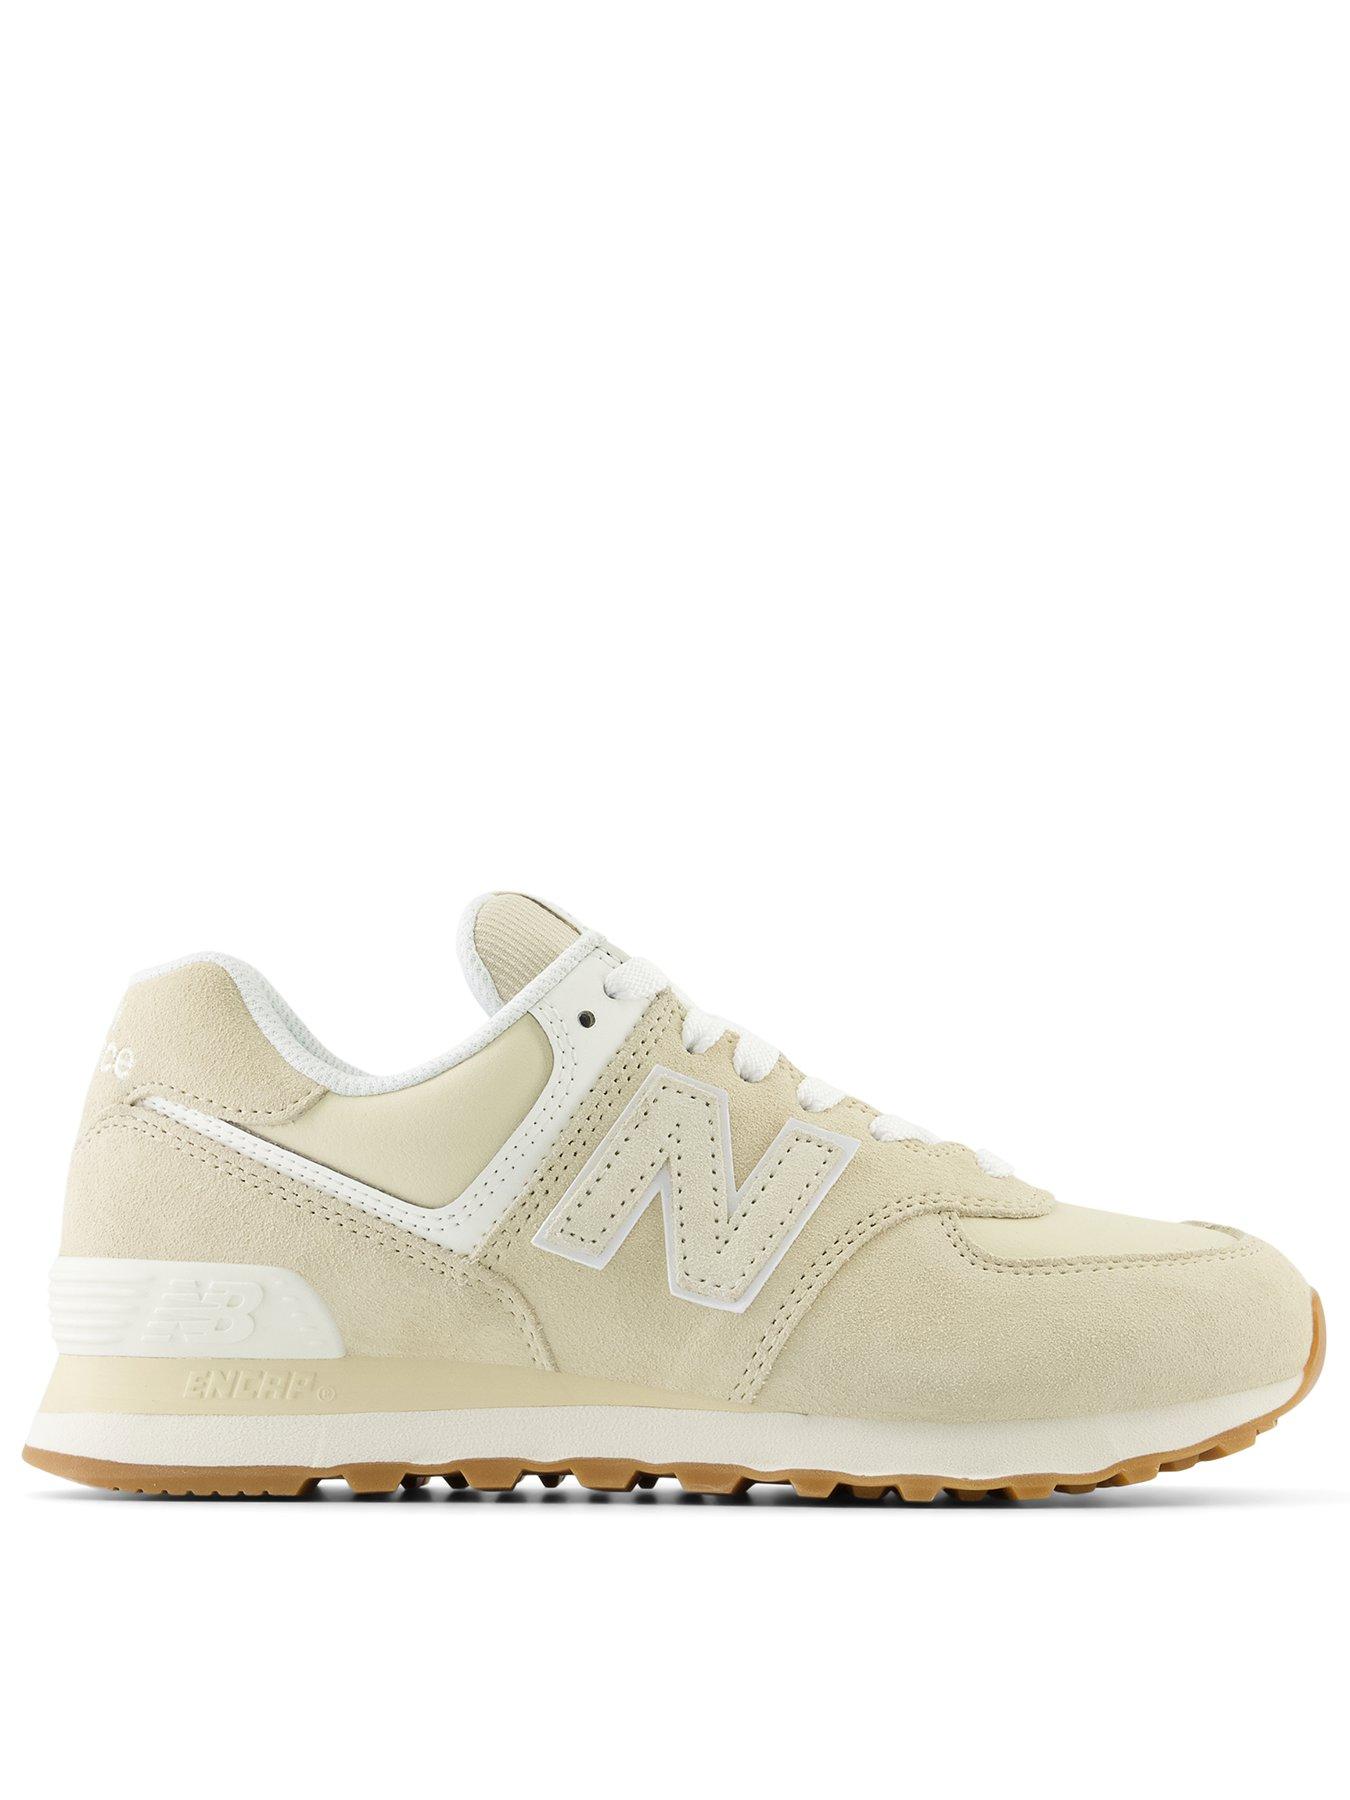 New Balance Women's 574 v3 Suede Retro Lifestyle Sneakers